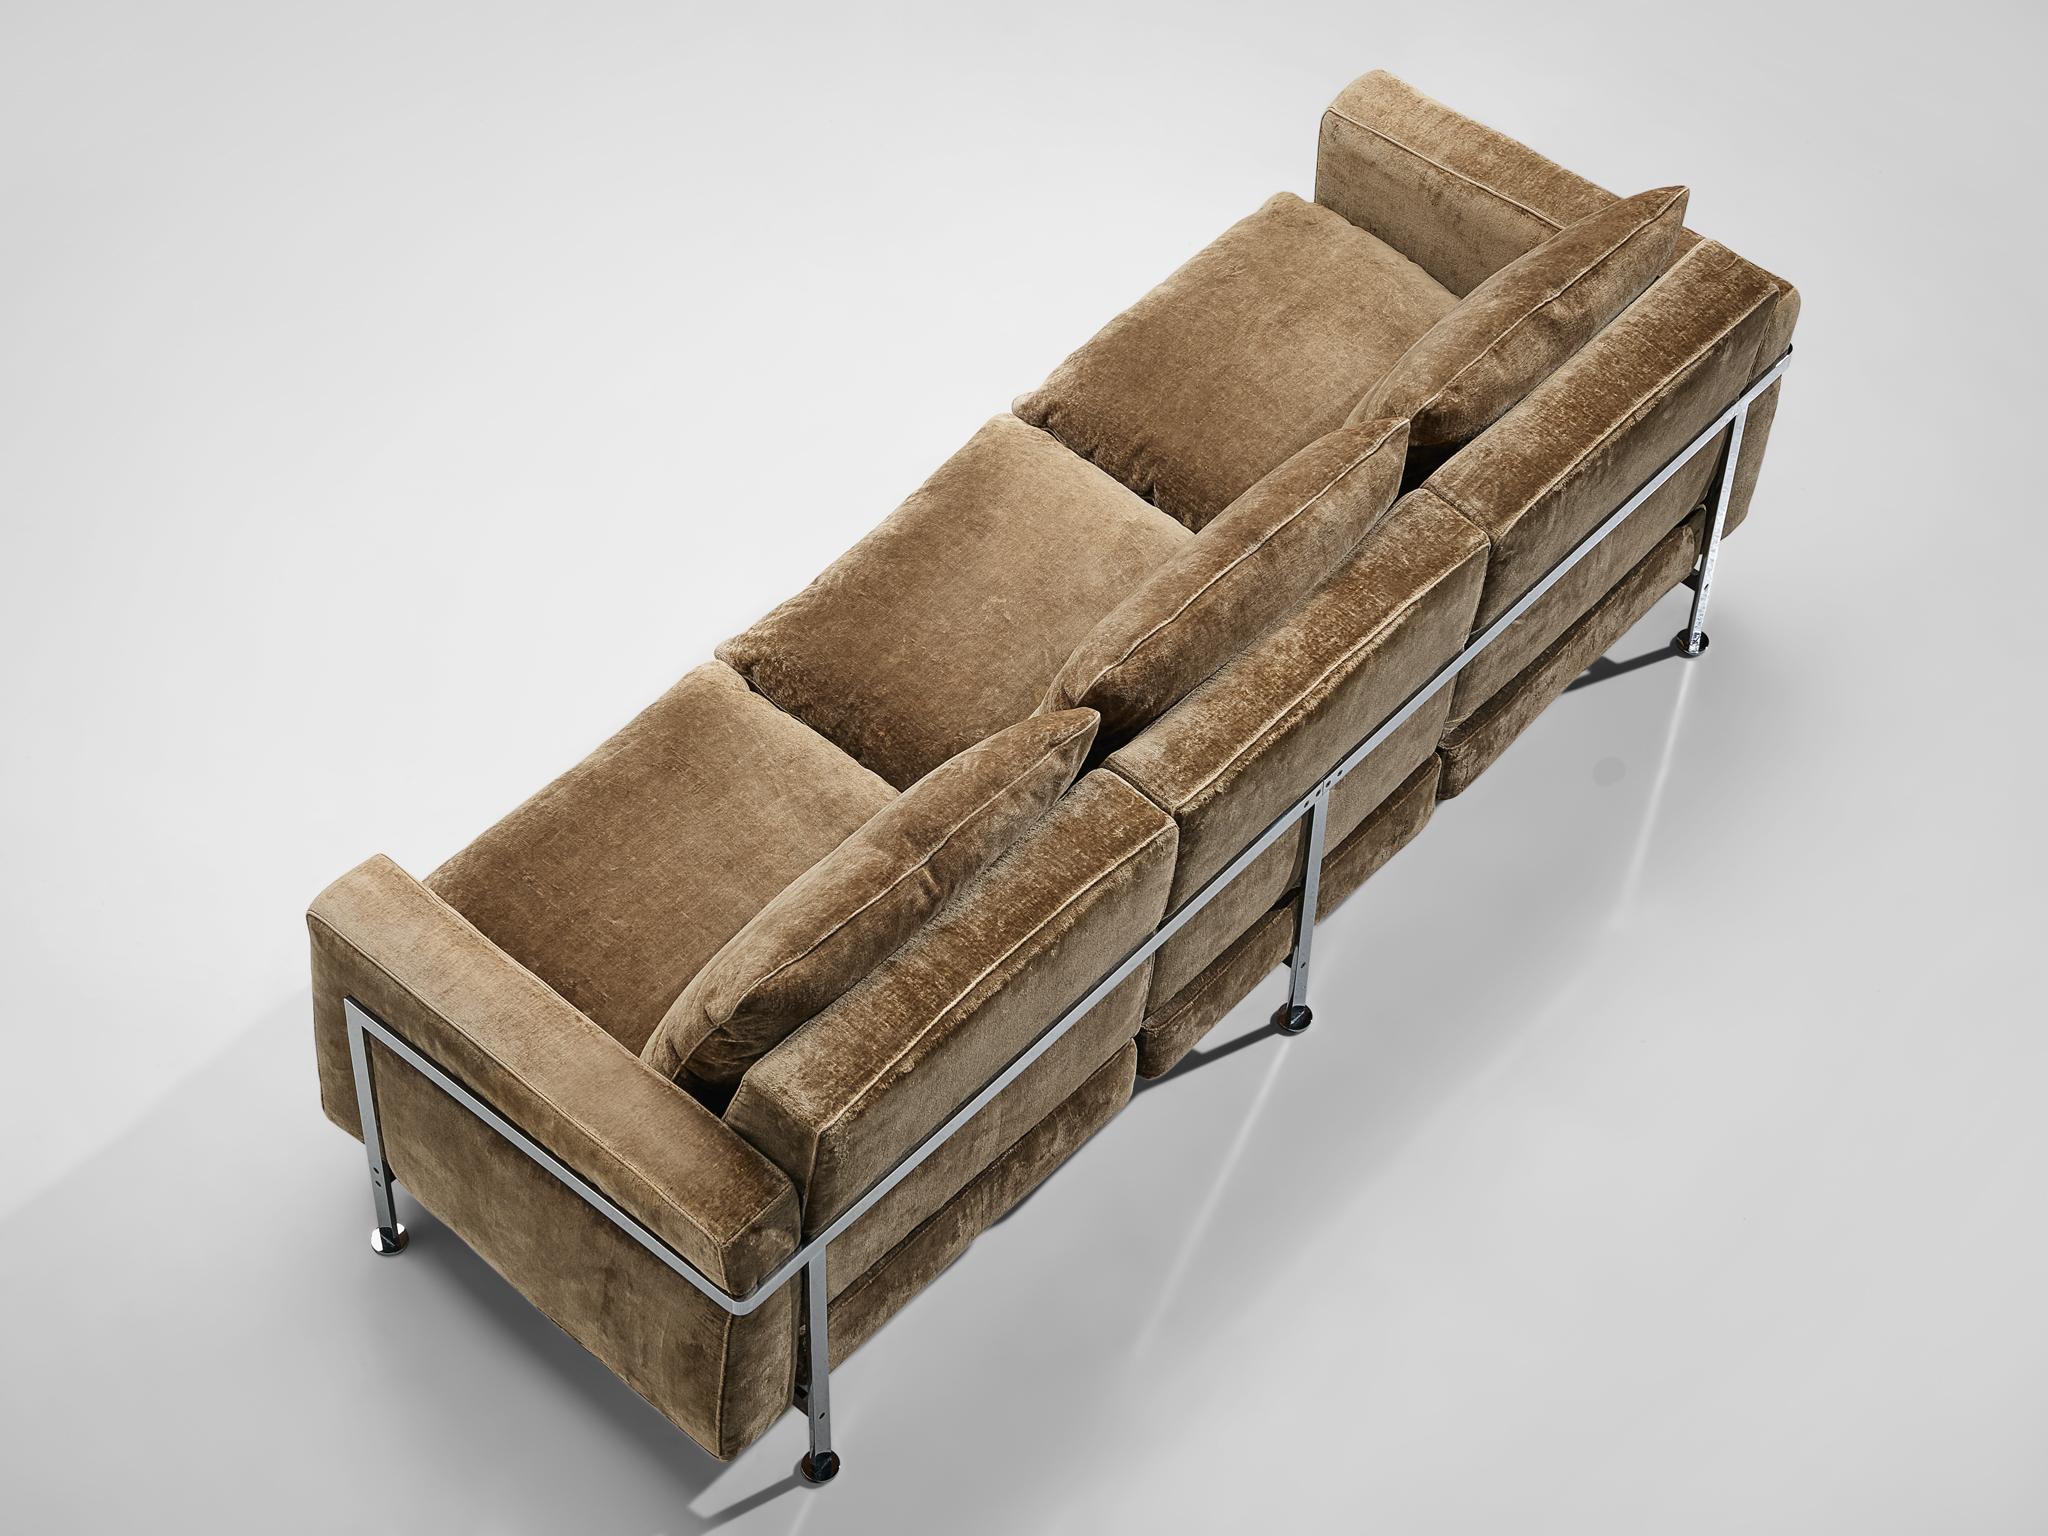 Robert Hausmann for De Sede, sofa in light brown velvet, Switzerland, 1954.

This comfortable velvet sofa is designed with a chromed iron frame that functions as a basket for the cushions on the inside. The thick back and seat cushion provide an